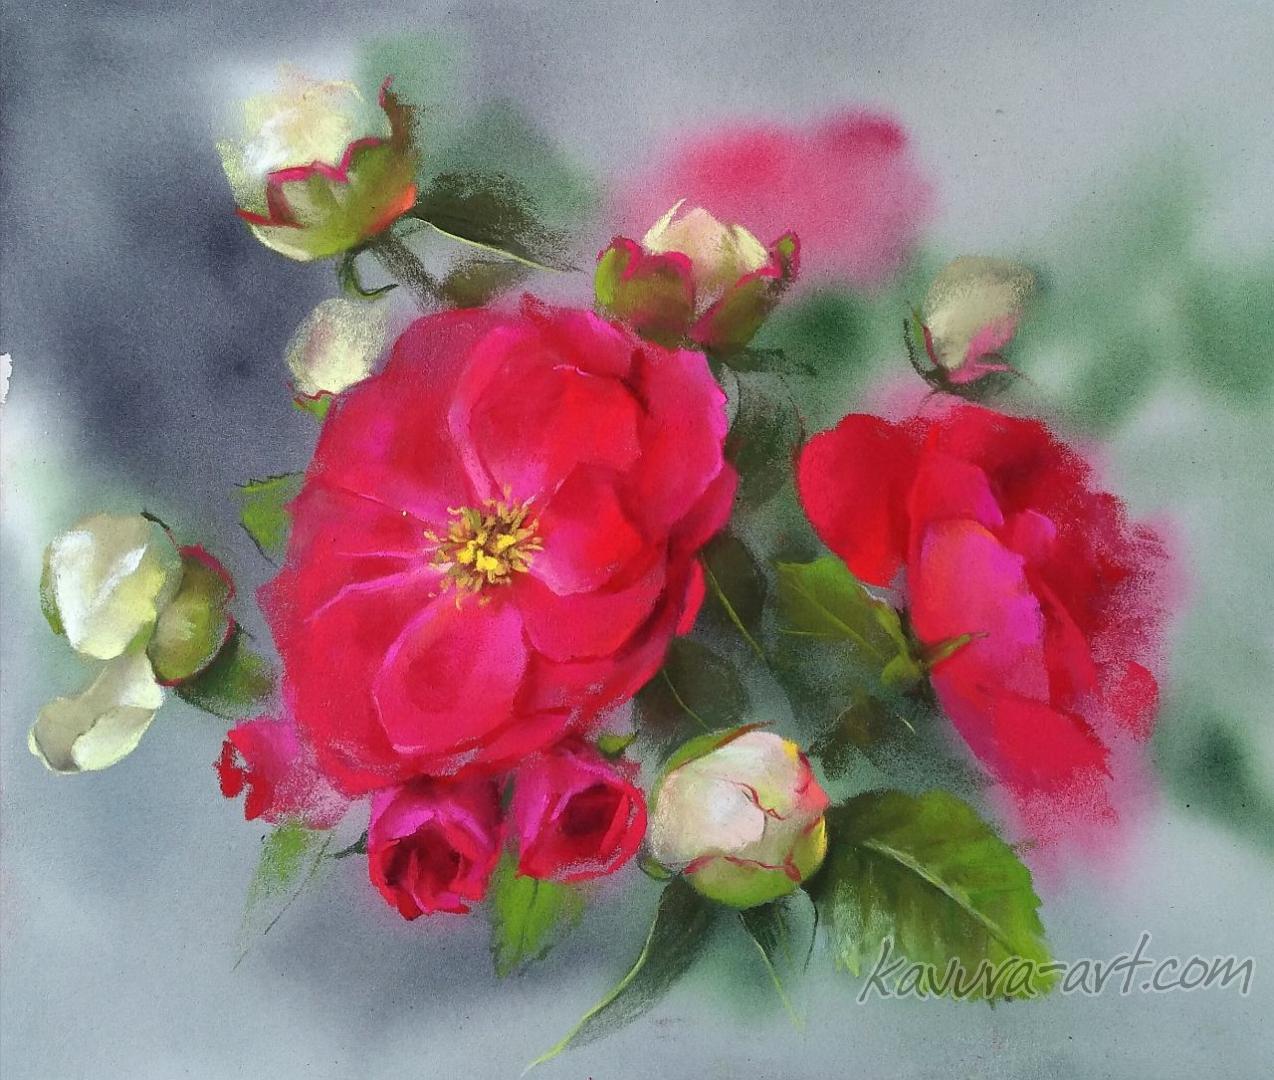 "Roses and peonies" Pastel on paper.